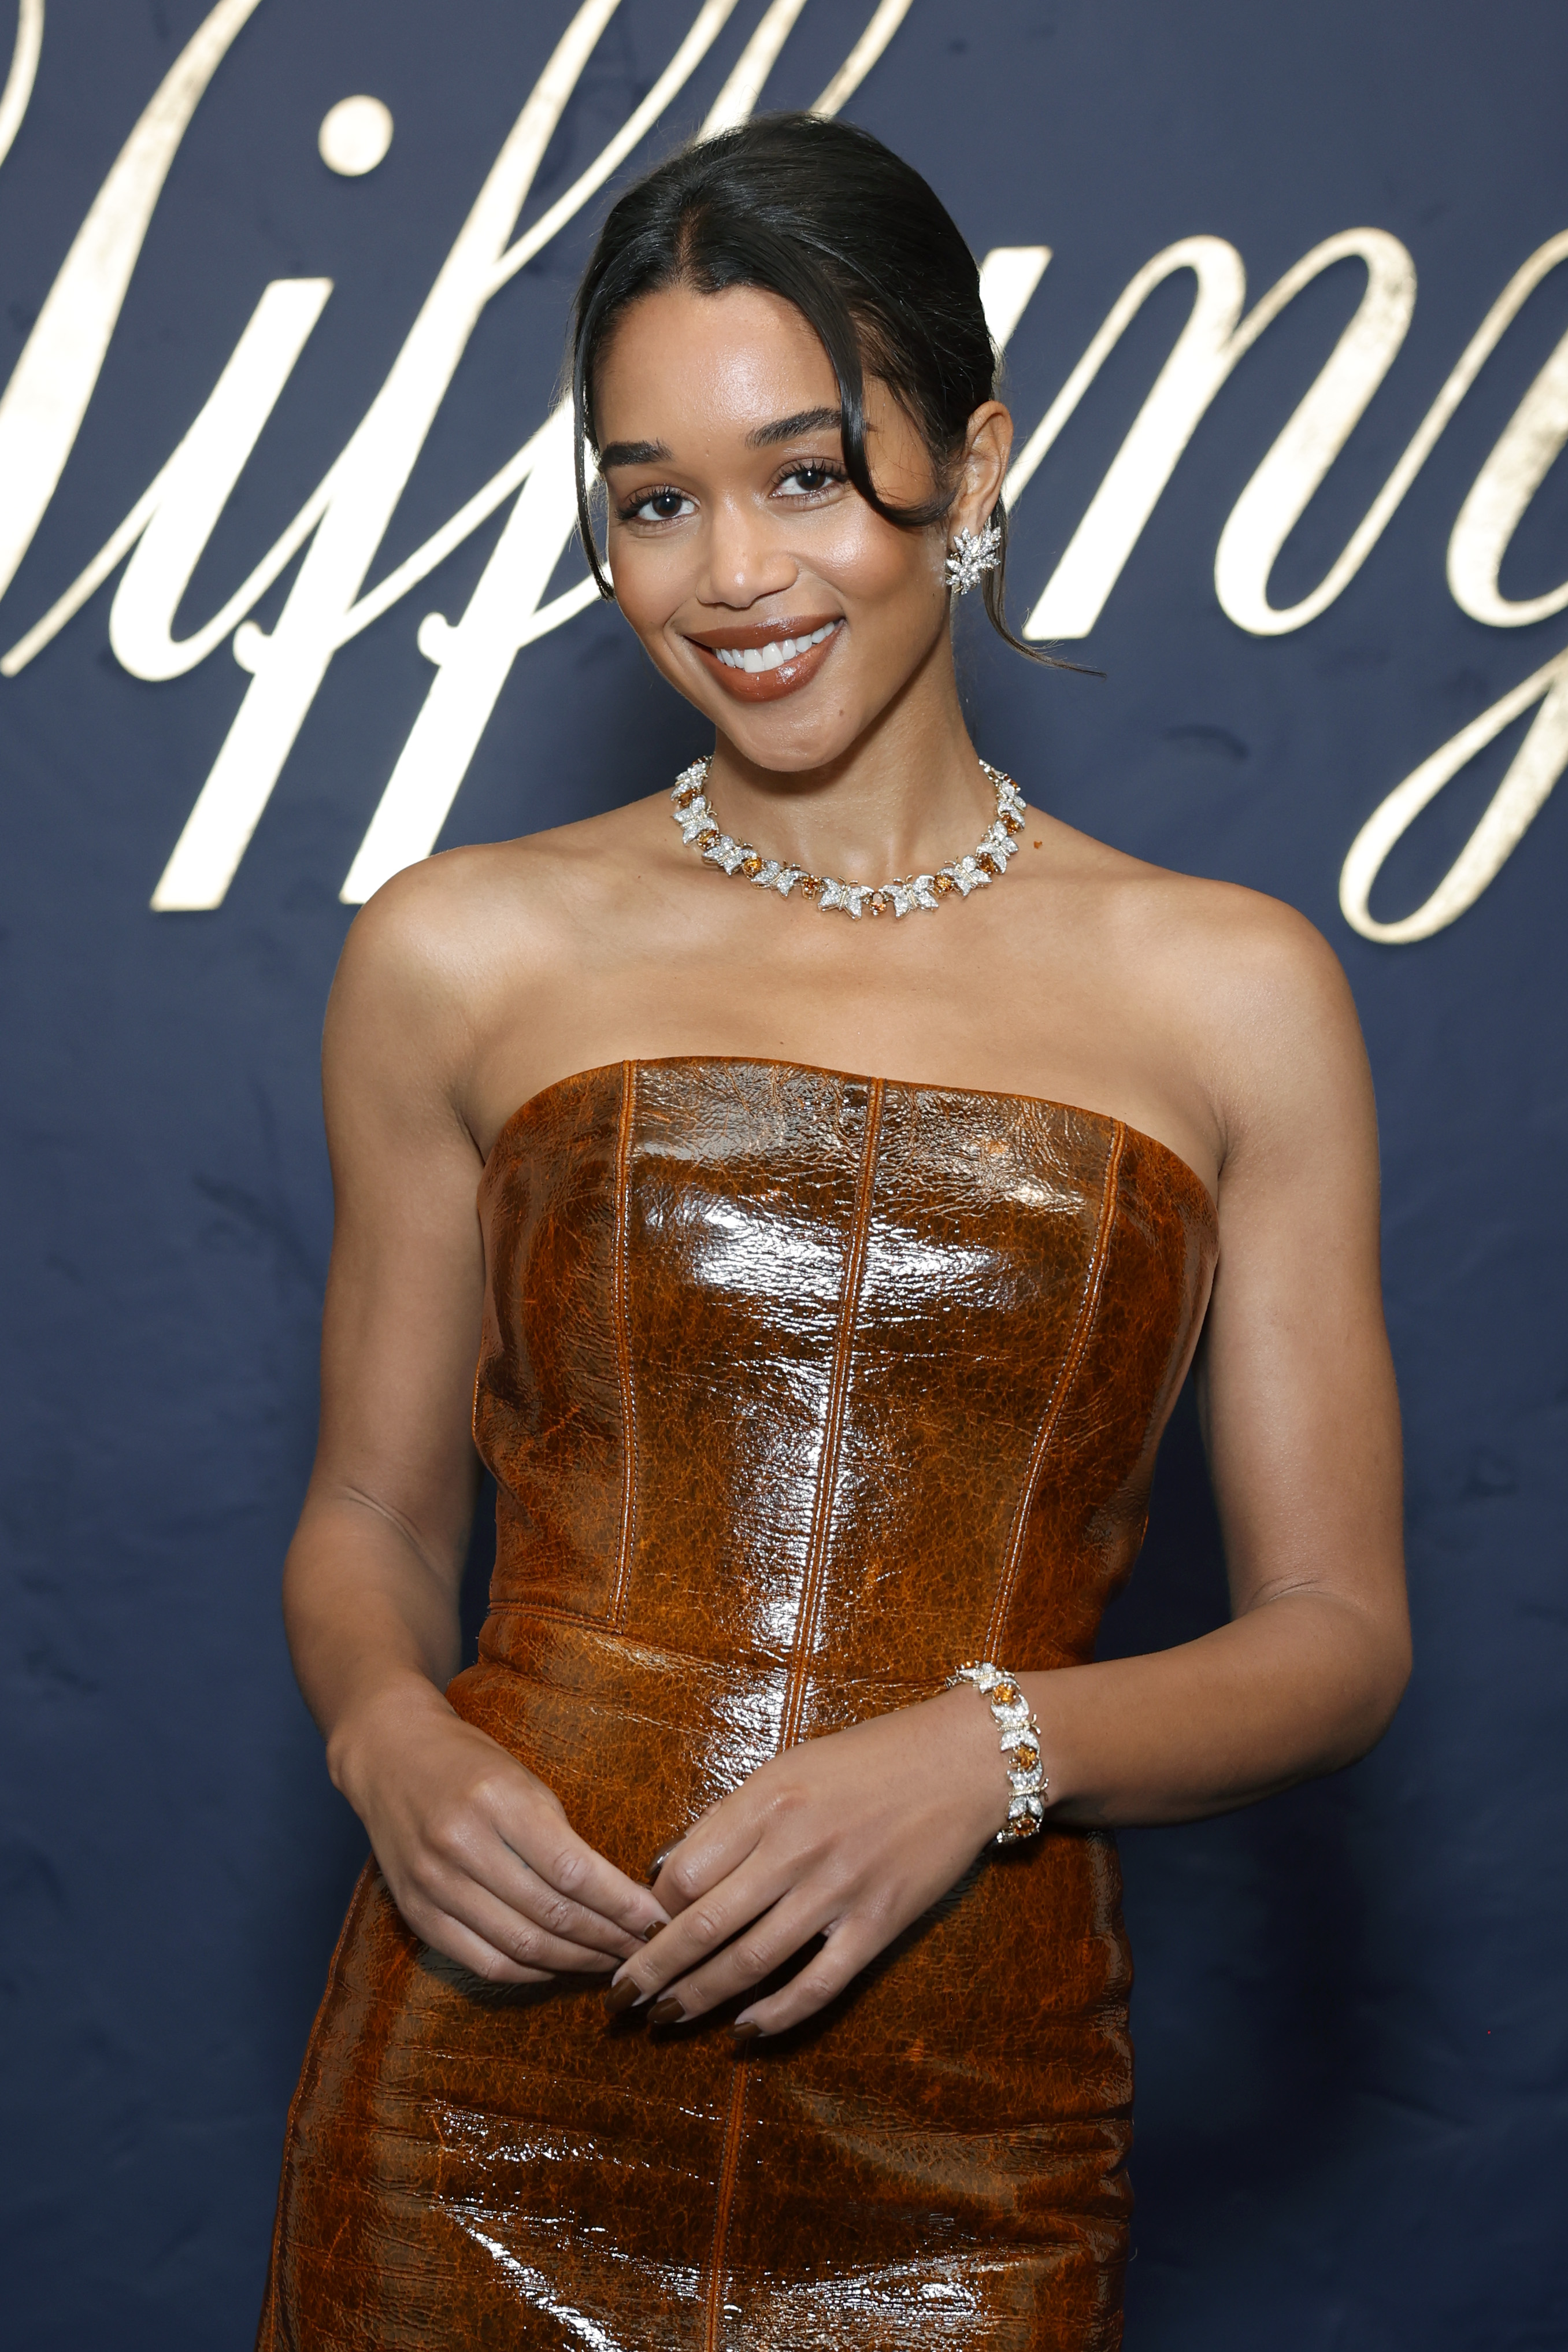 Laura Harrier wearing a brown dress with a diamond necklace